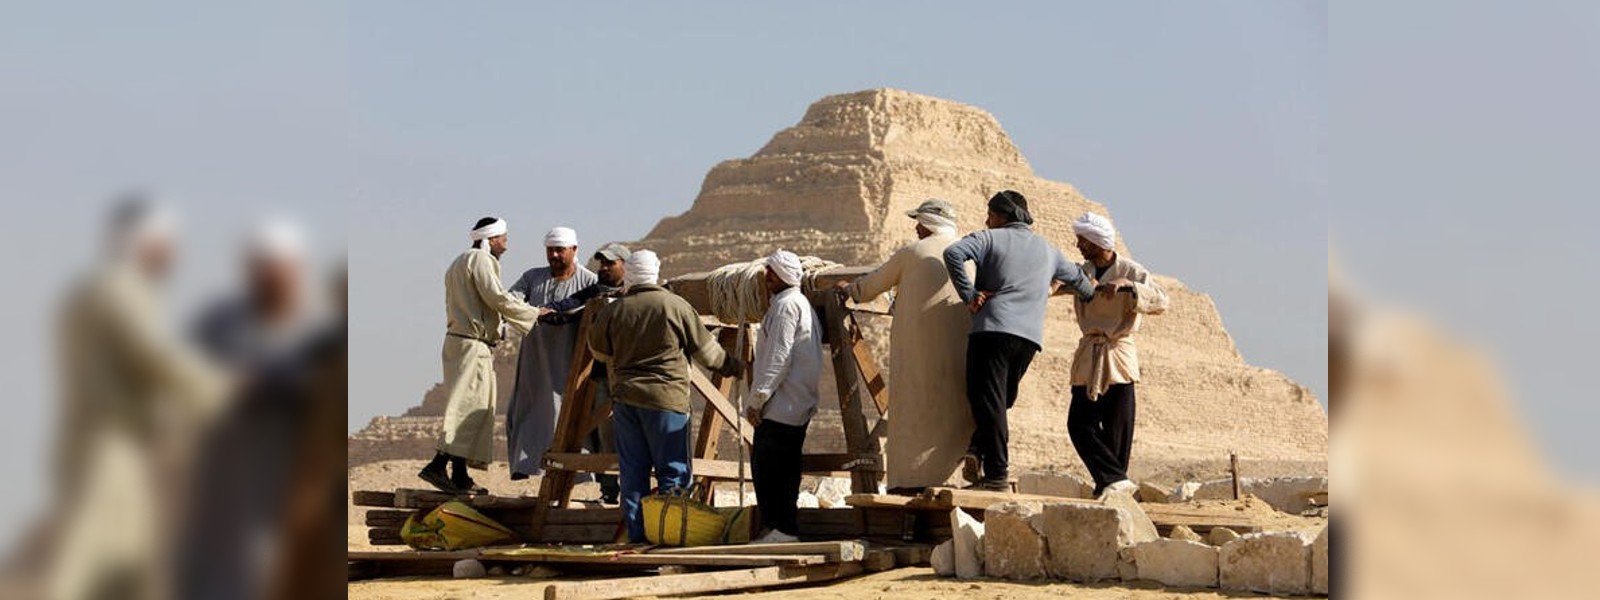 ‘Oldest and most complete’ mummy found in Cairo, Egypt